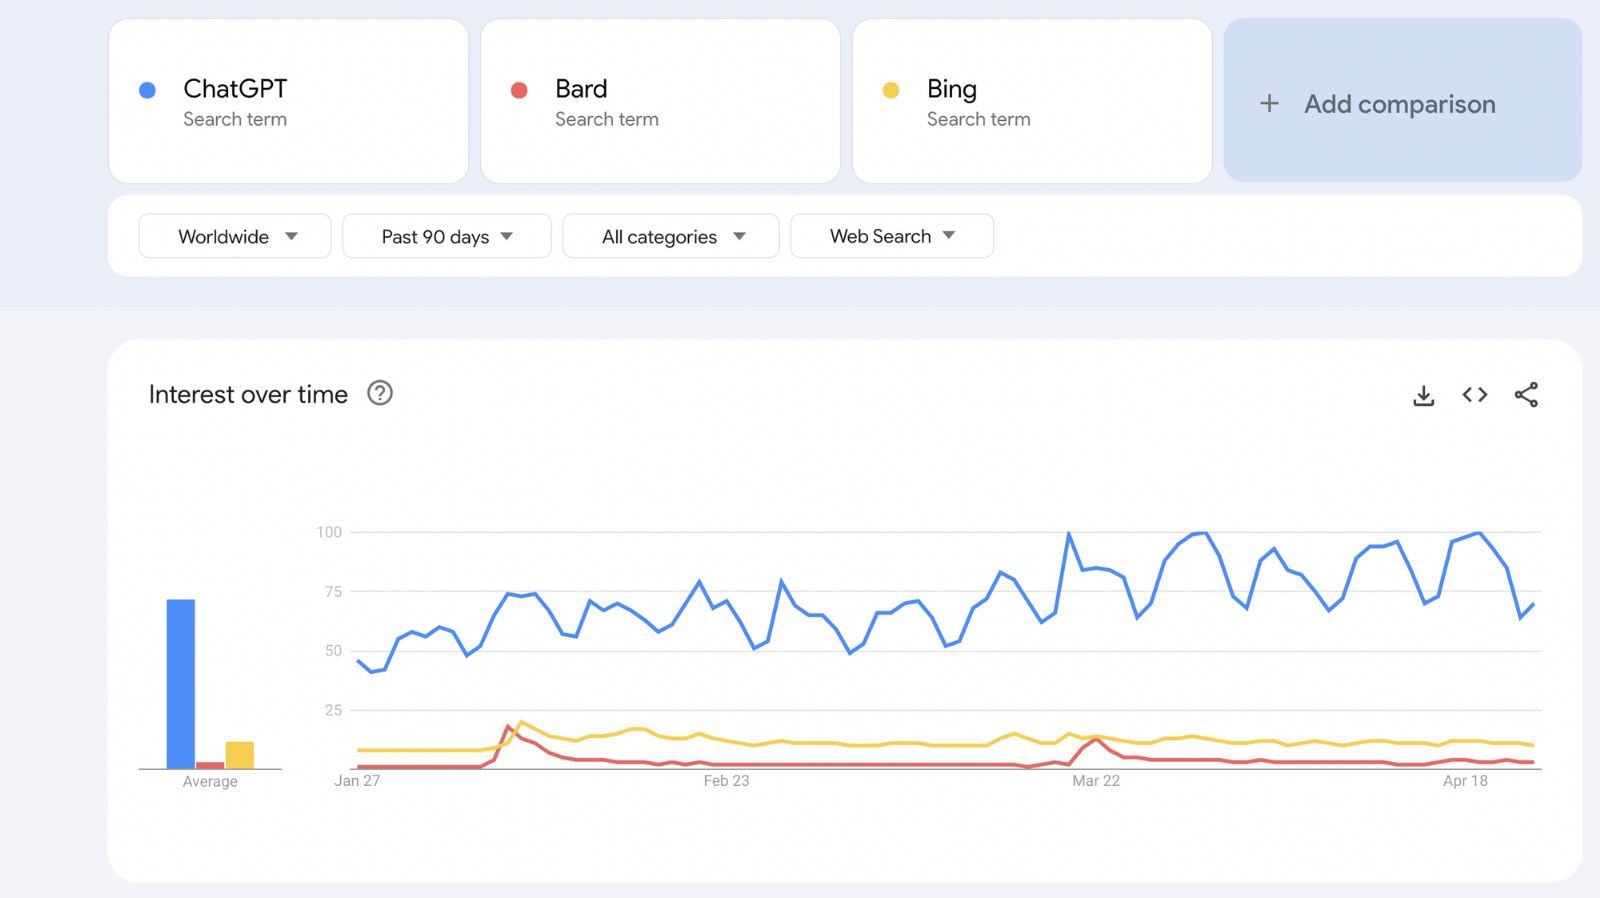 ChatGPT Grows in Popularity as Bing and Bard Flatline - Artisana